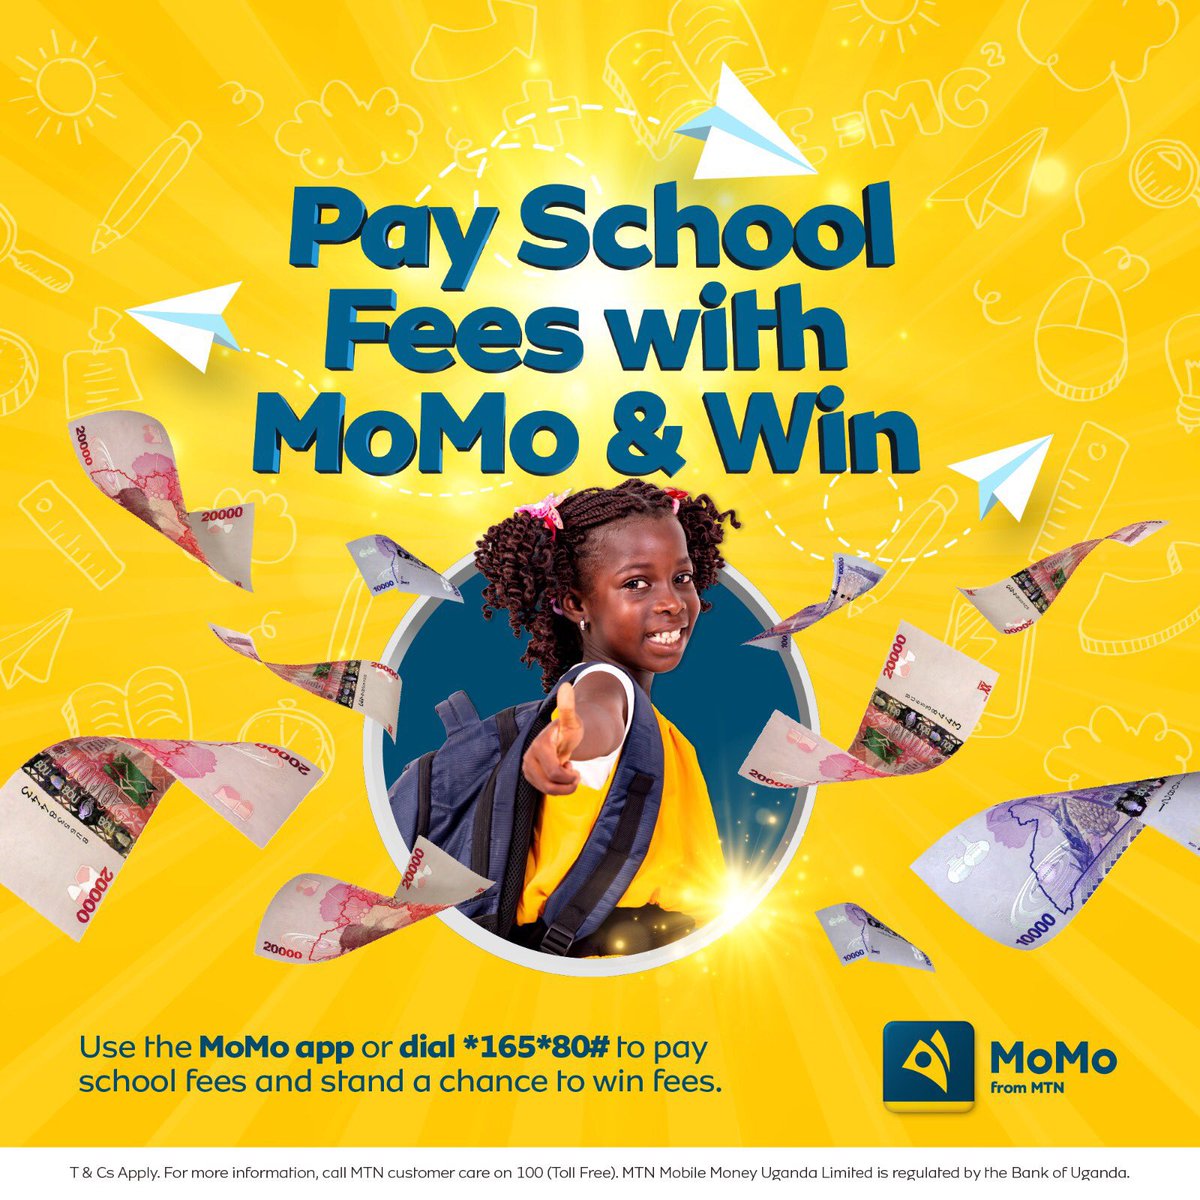 Imagine paying this term's school fees and winning a free pass for Term 3! With #MTNMoMo, it's not just a dream – it's a possibility. 

Dial *165*80# or use the MoMo app to pay and stand a chance to WIN school fees. #PaySchoolFeesWithMoMo